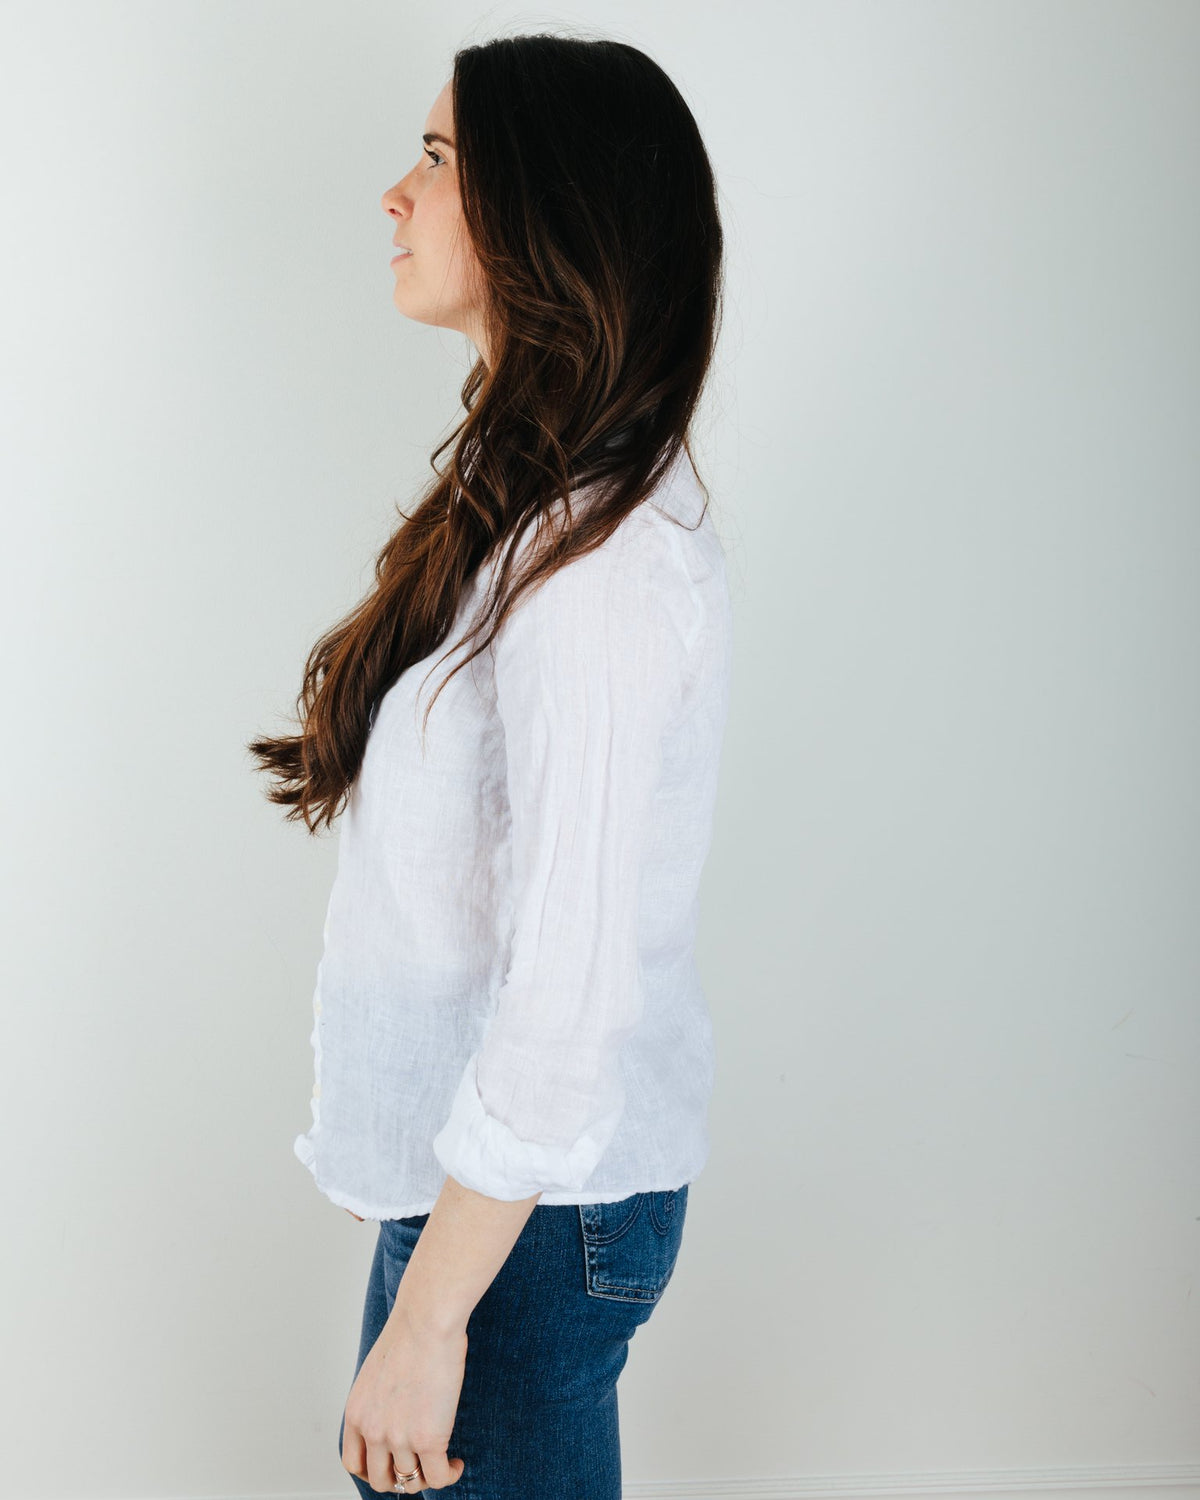 CP Shades Clothing Romy Blouse in White Linen